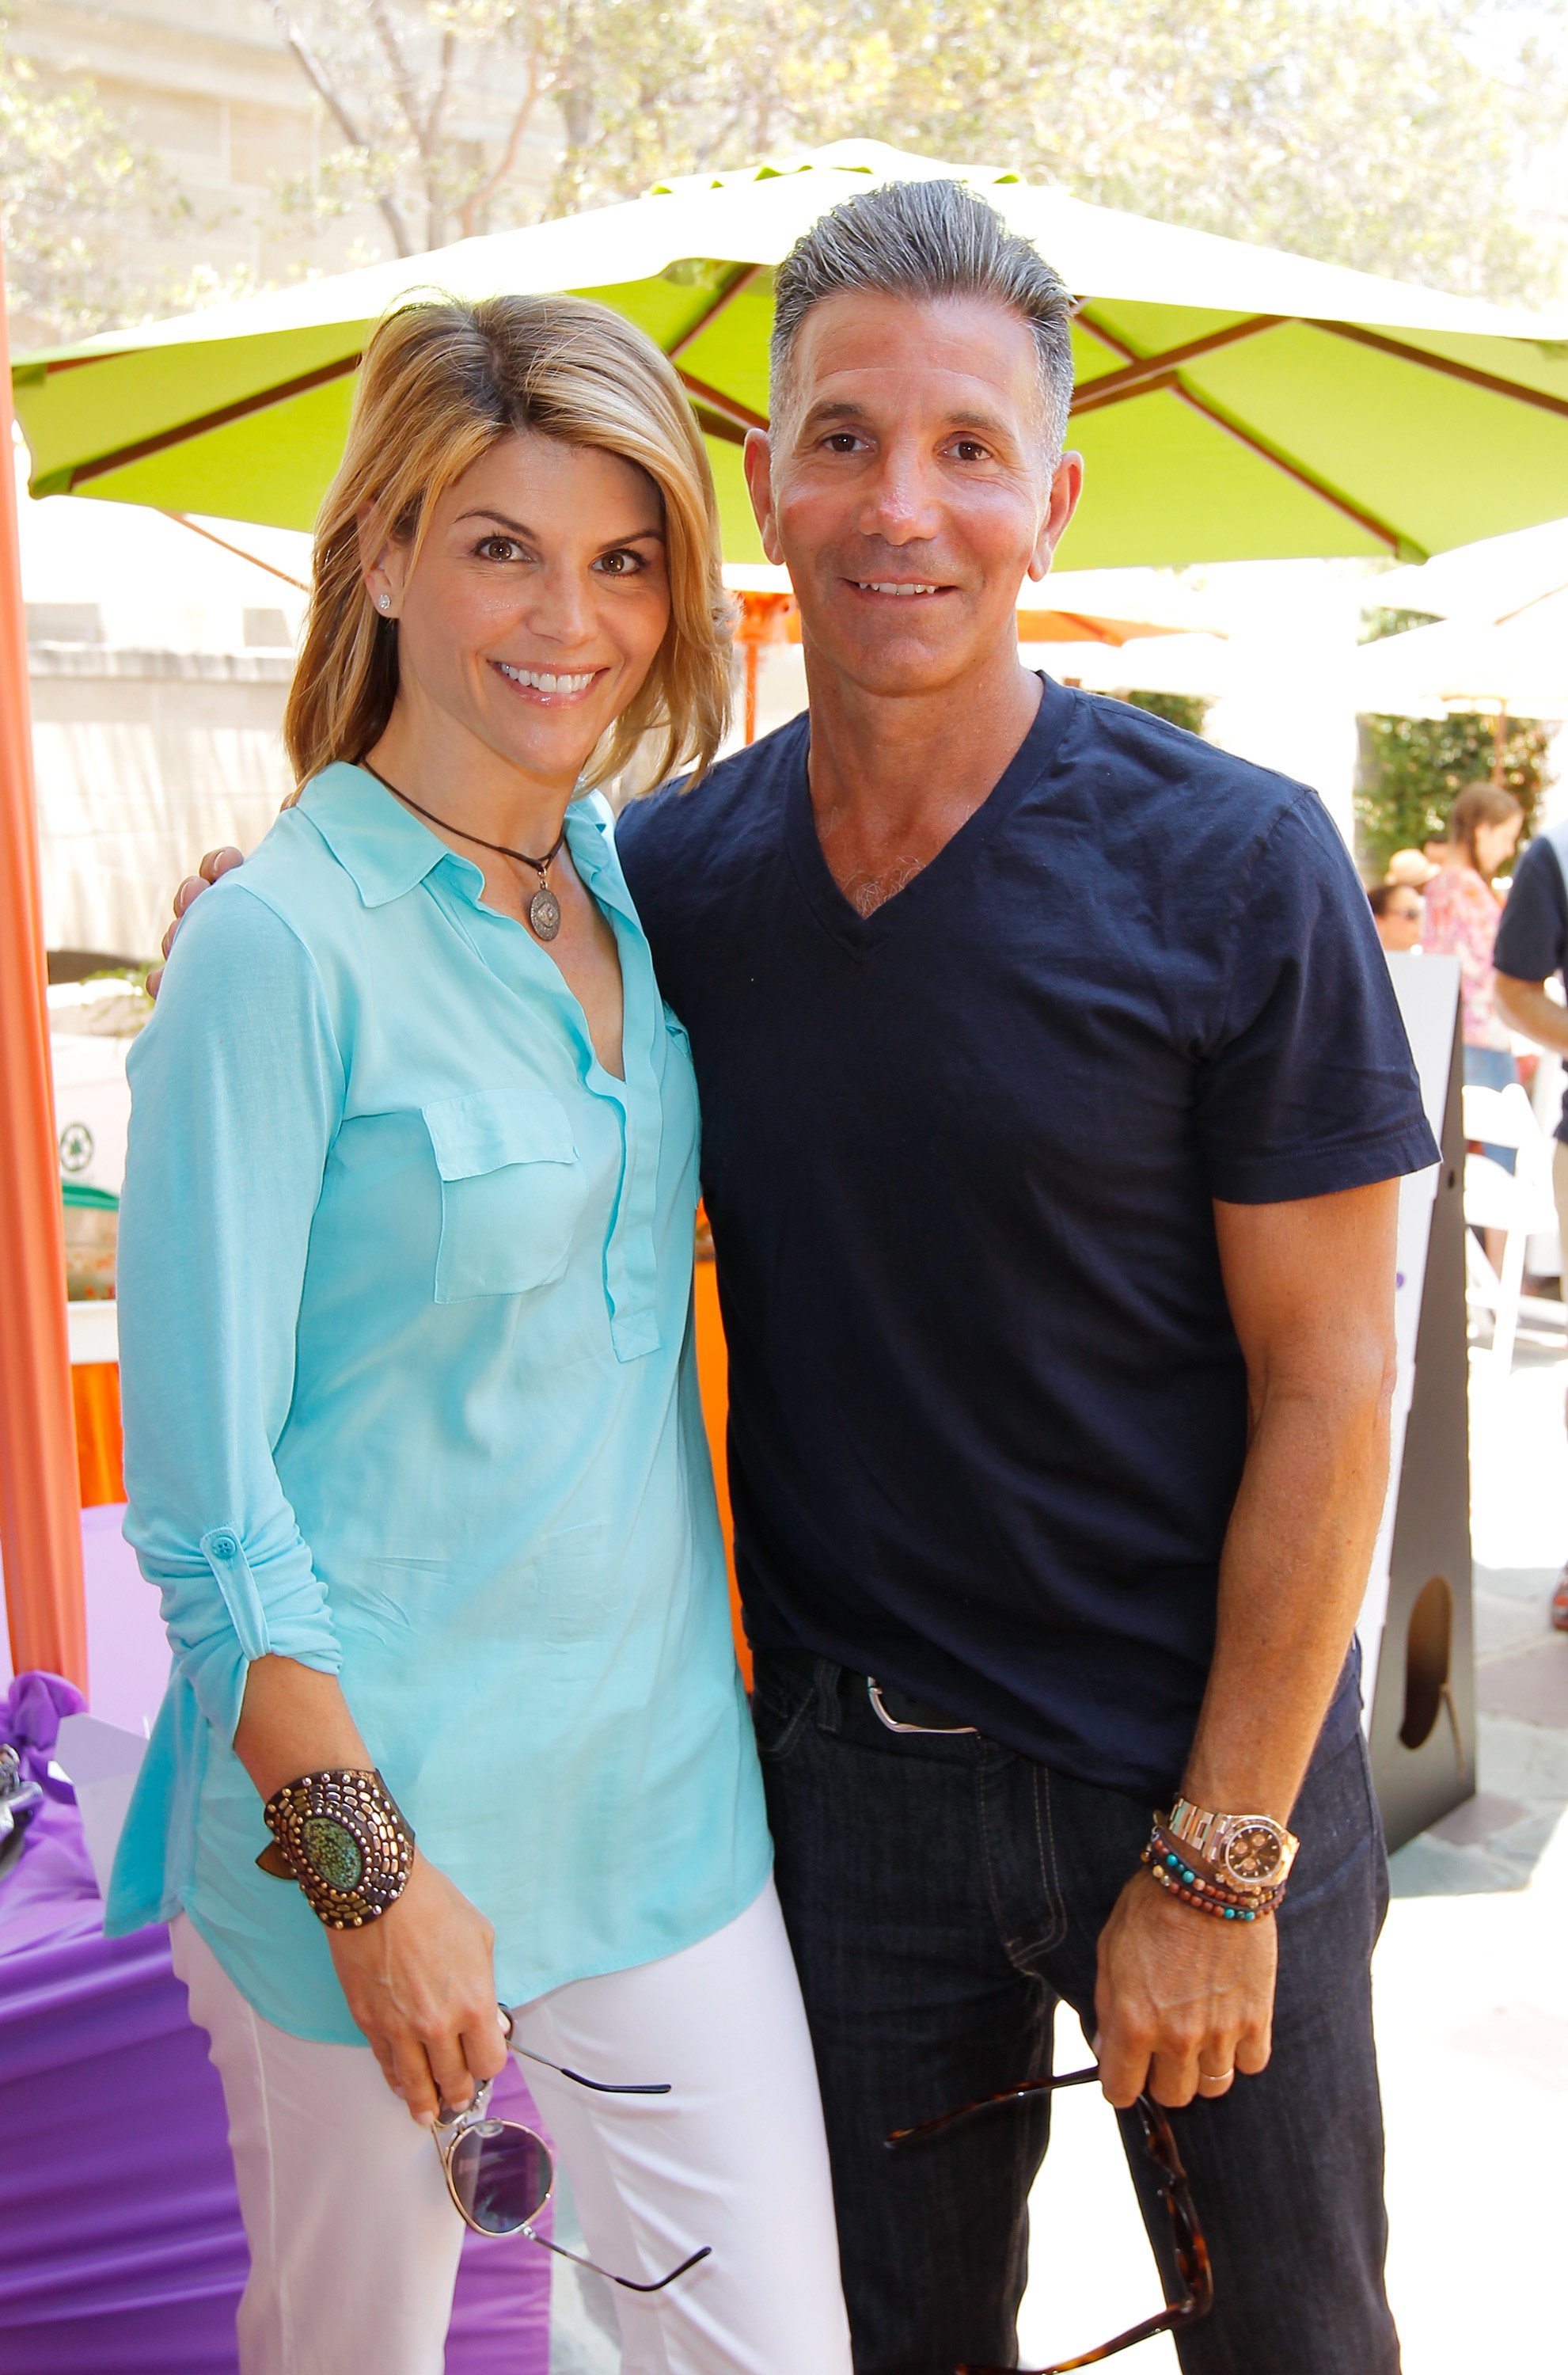 Lori Loughlin and Mossimo Giannulli pictured attending the 6th Annual Kidstock Music And Arts Festival, 2012. | Photo: Getty Images